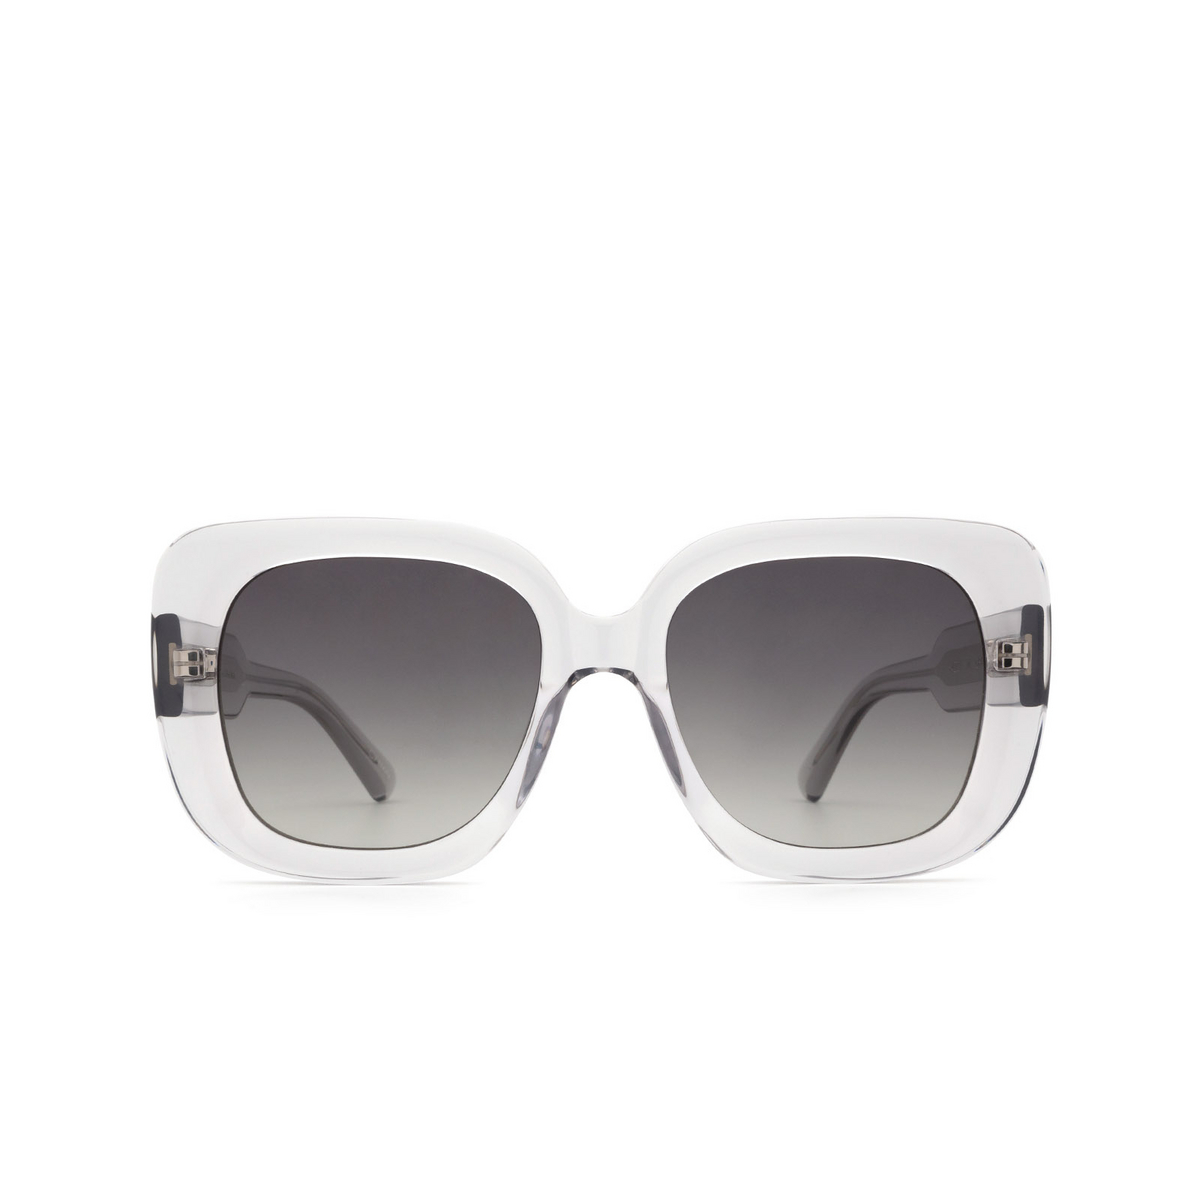 Chimi 10 (2021) Sunglasses GREY - front view